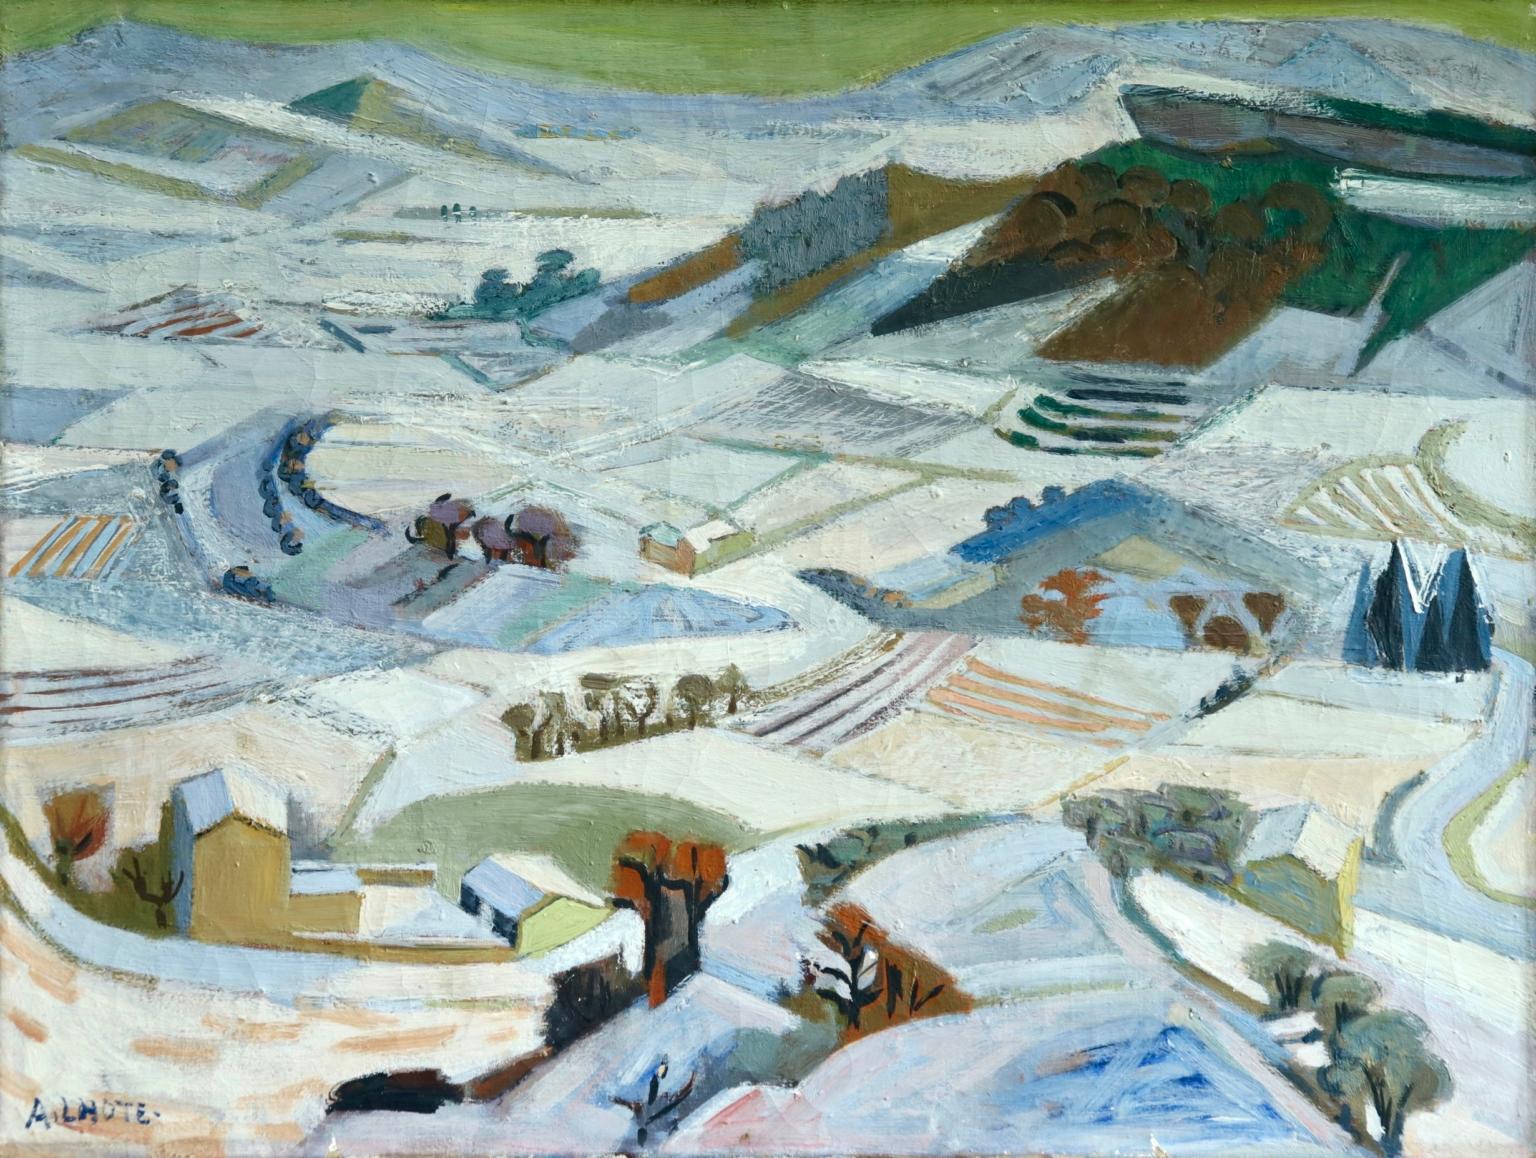 Neige a Gordes - 20th Century Cubist Oil, Snowy Winter Landscape by Andre Lhote